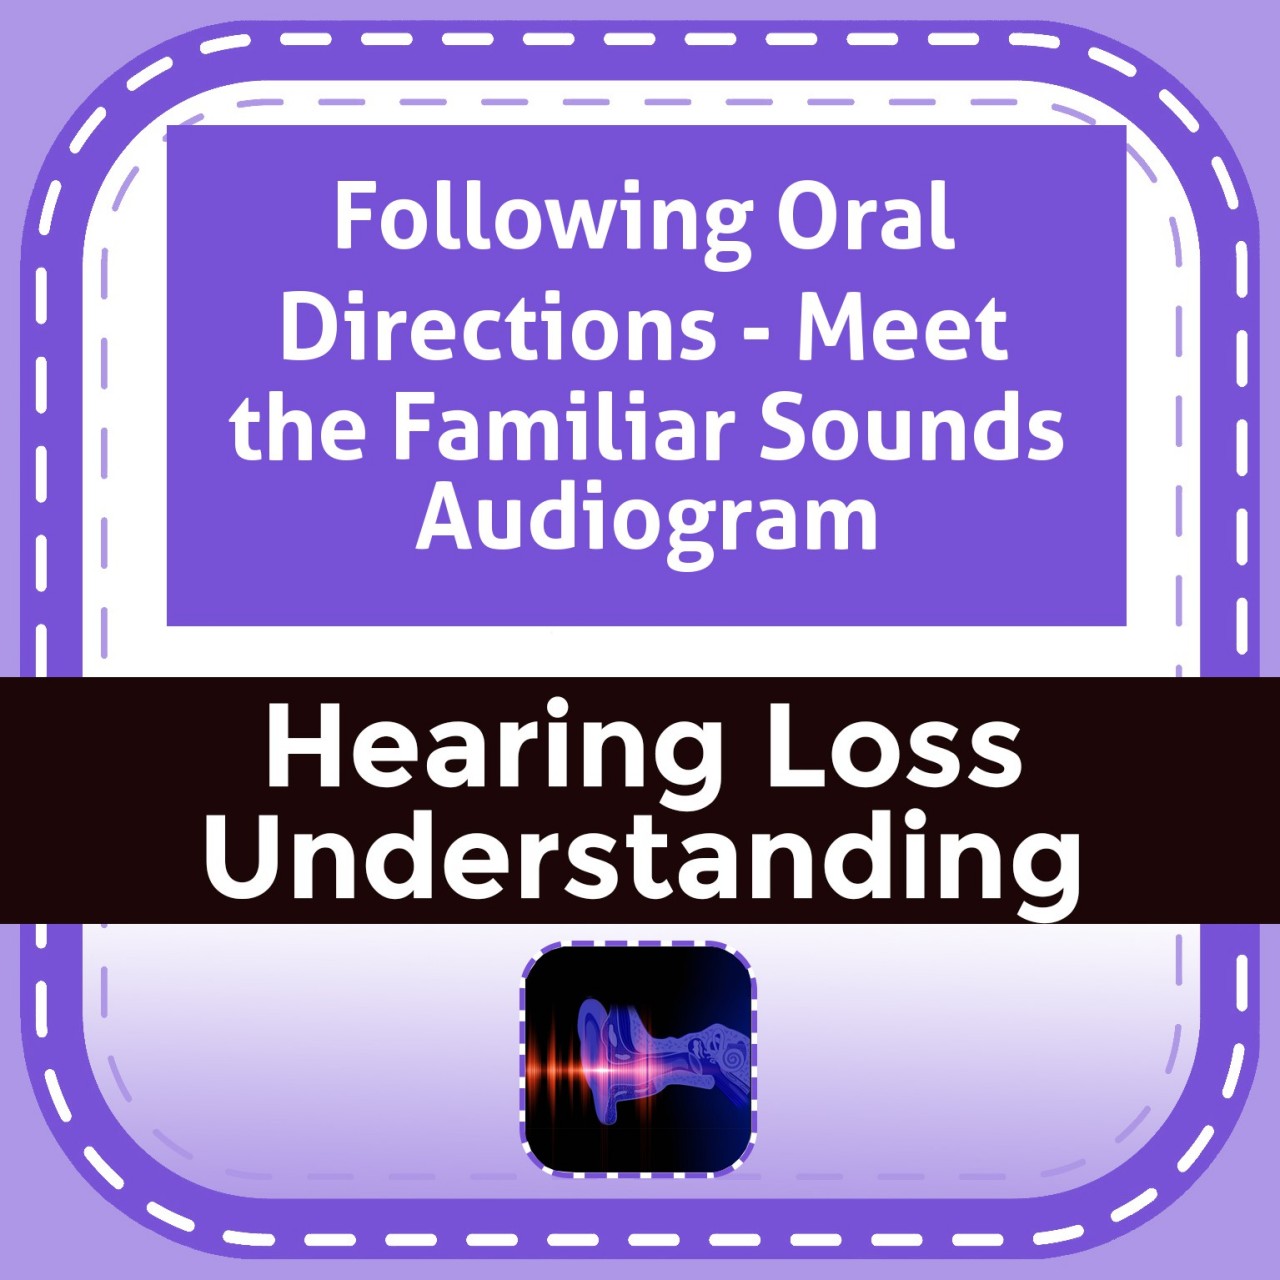 Following Oral Directions - Meet the Familiar Sounds Audiogram